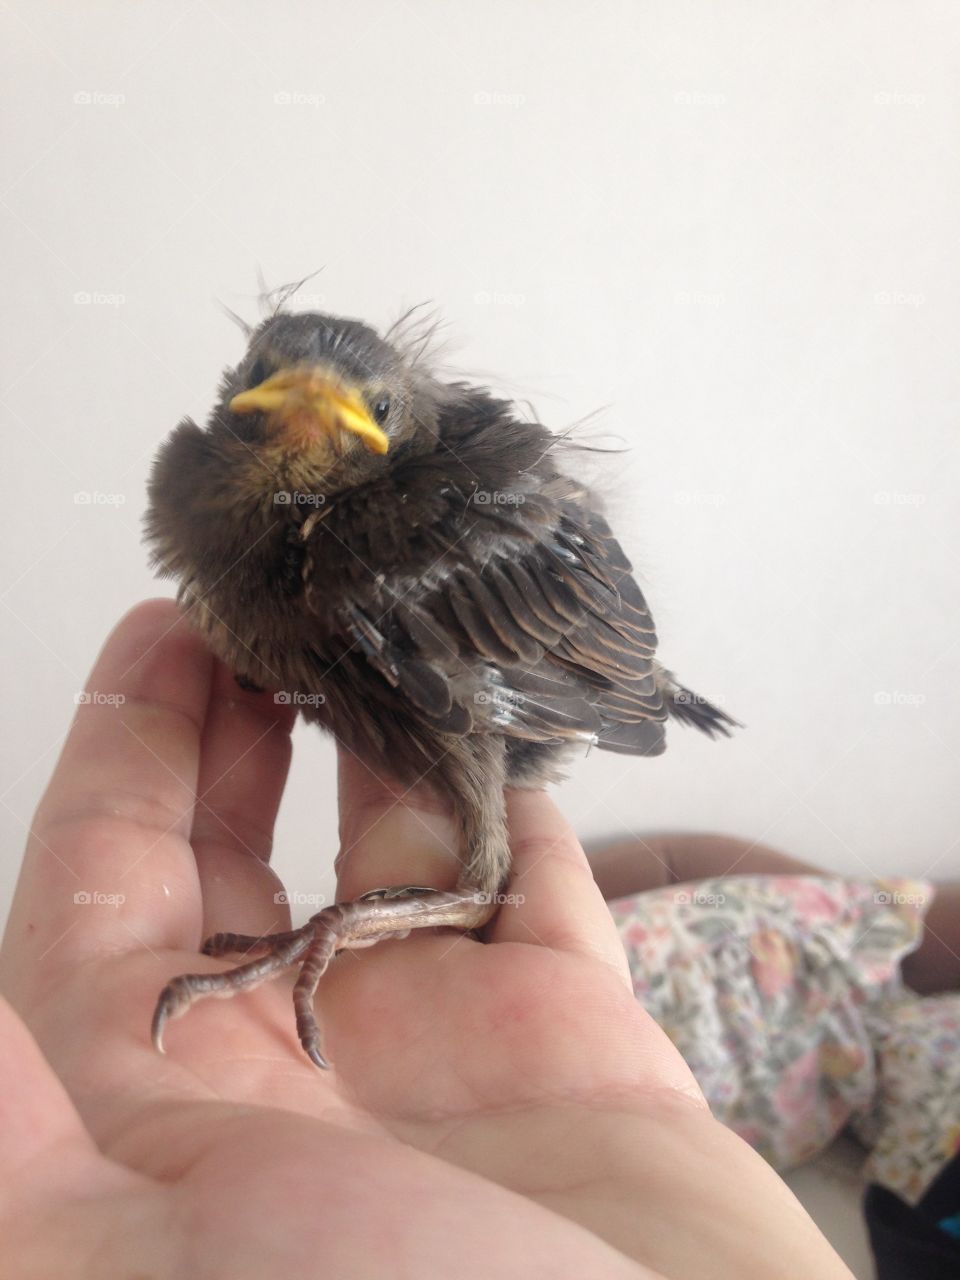 Kiki, a fledgling starling that fell out of her nest on a busy street and couldn't be rescued by her parents (we waited). We rescued her before she died of dehydration or starvation. She liked grapes and mealworms and started making "miss you" calls.